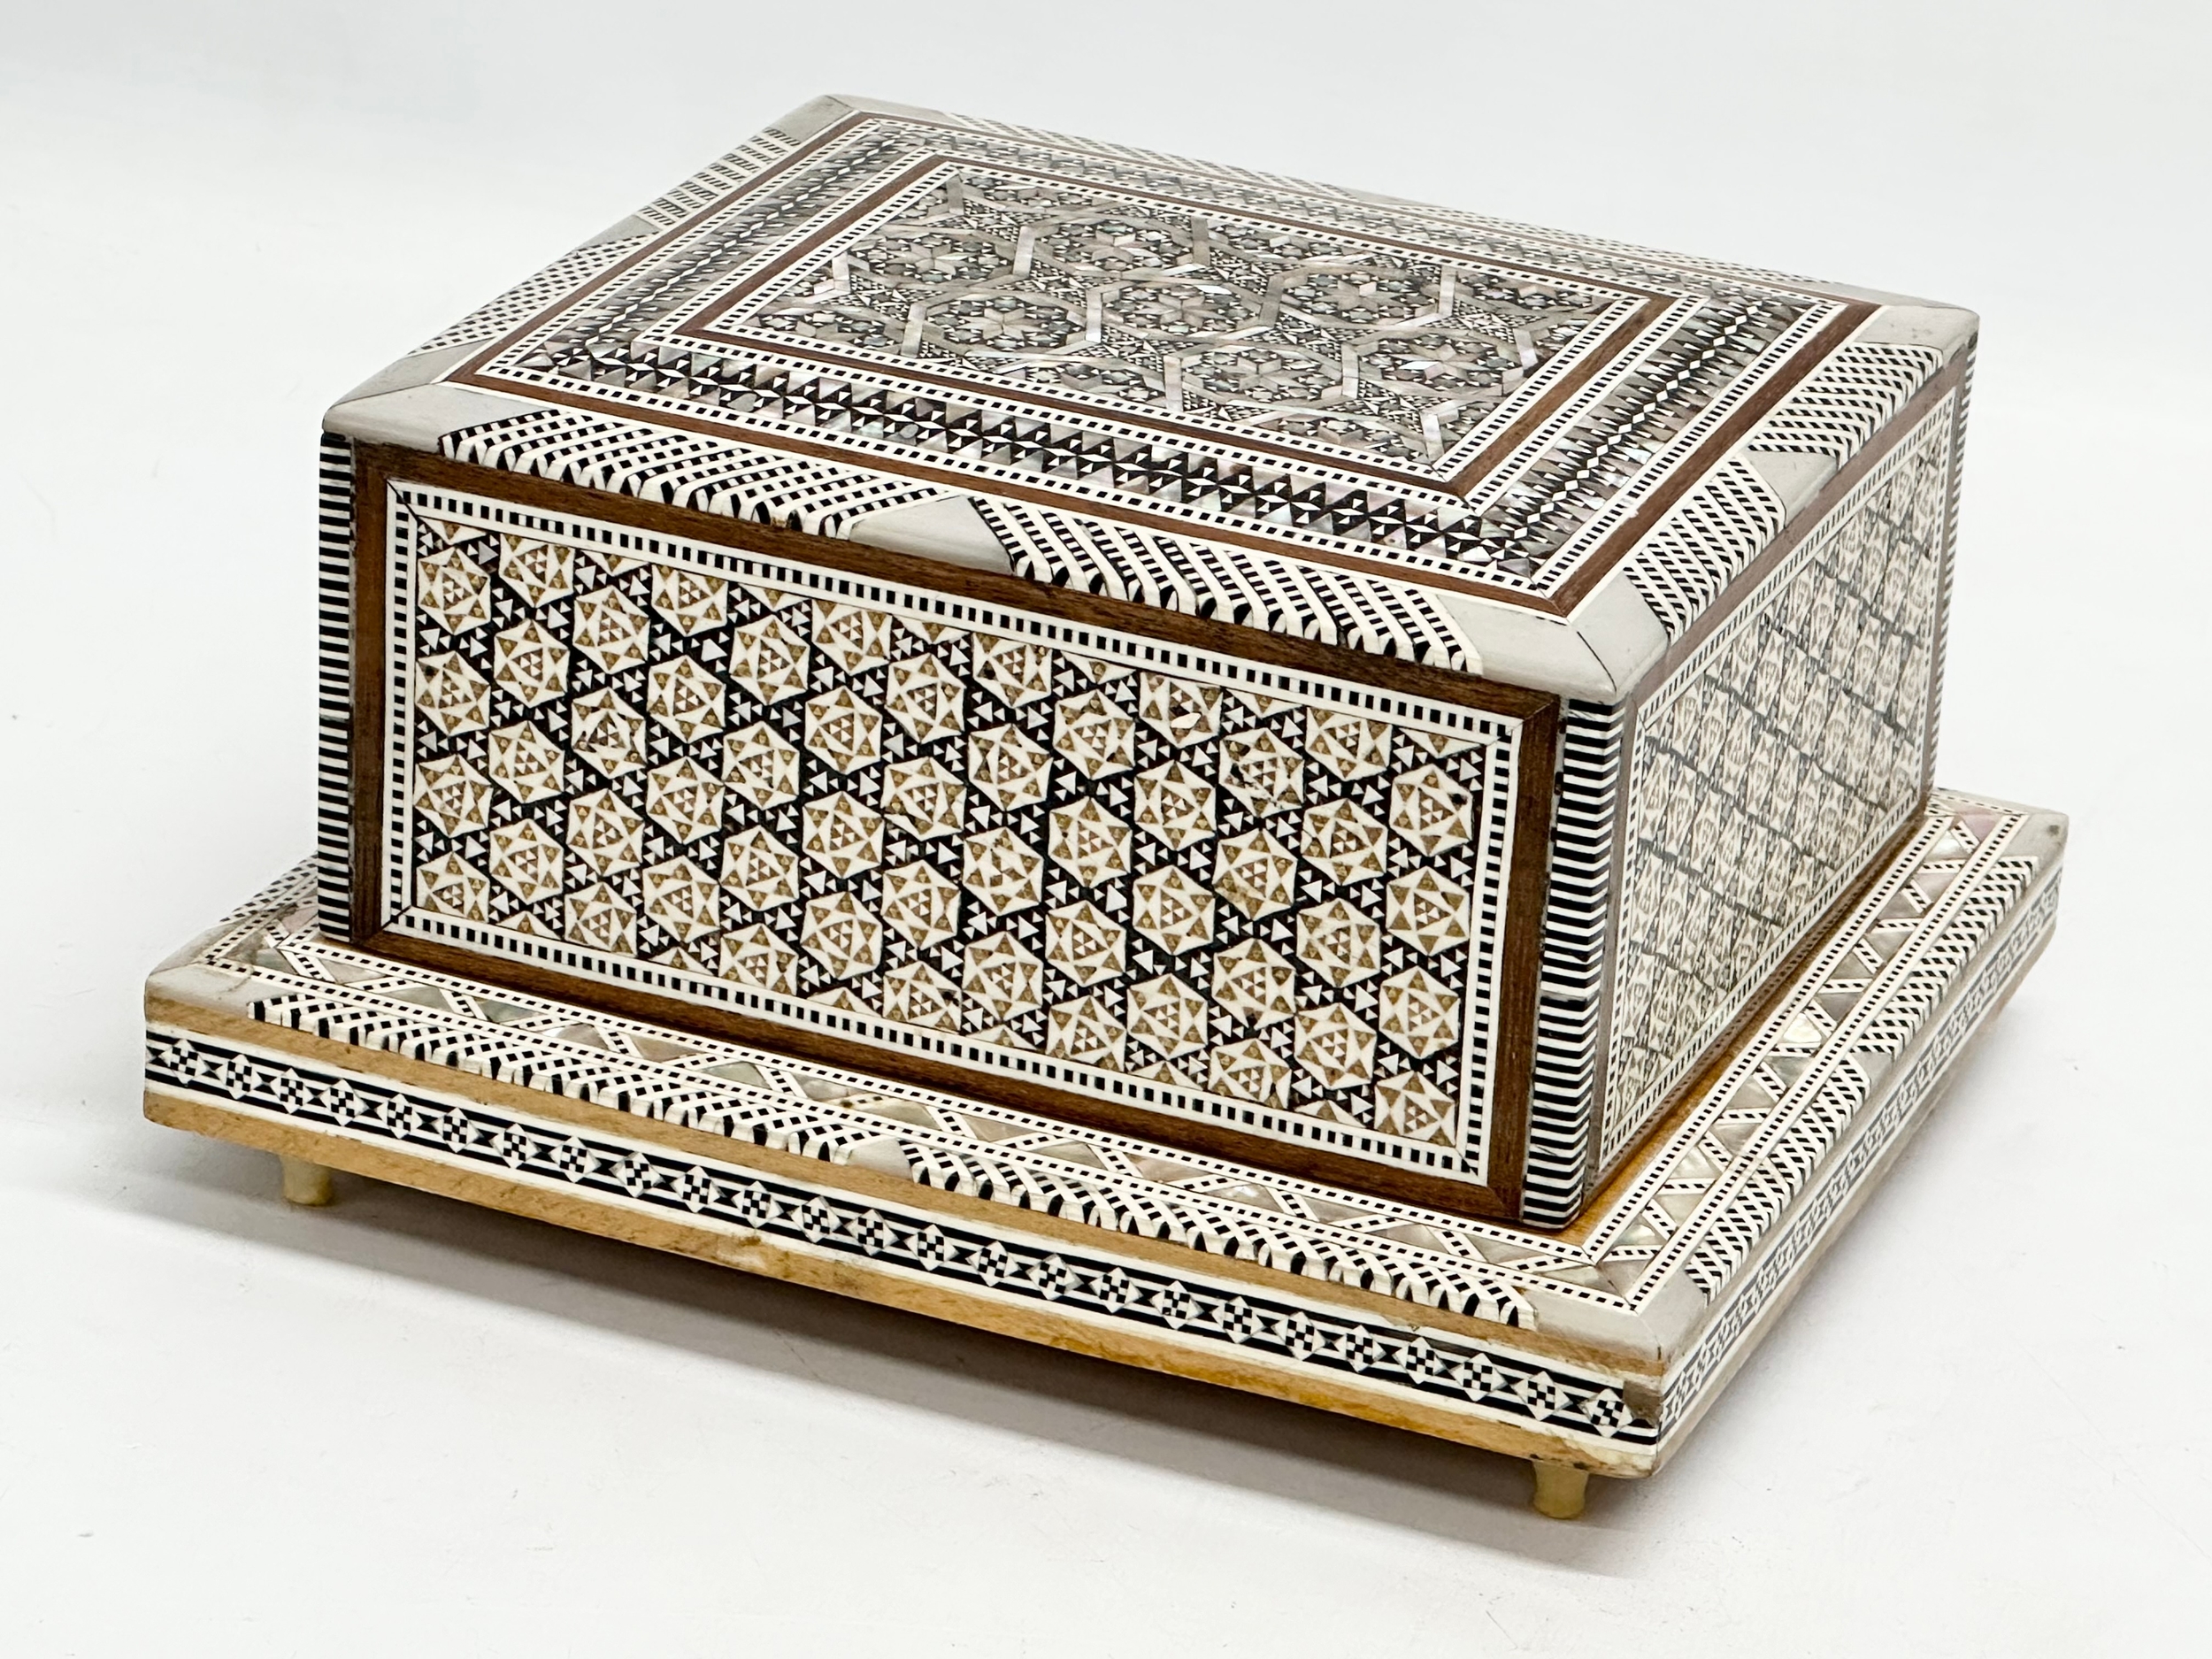 A Mother of Pearl inlaid musical cigarette box. 19x17x11cm